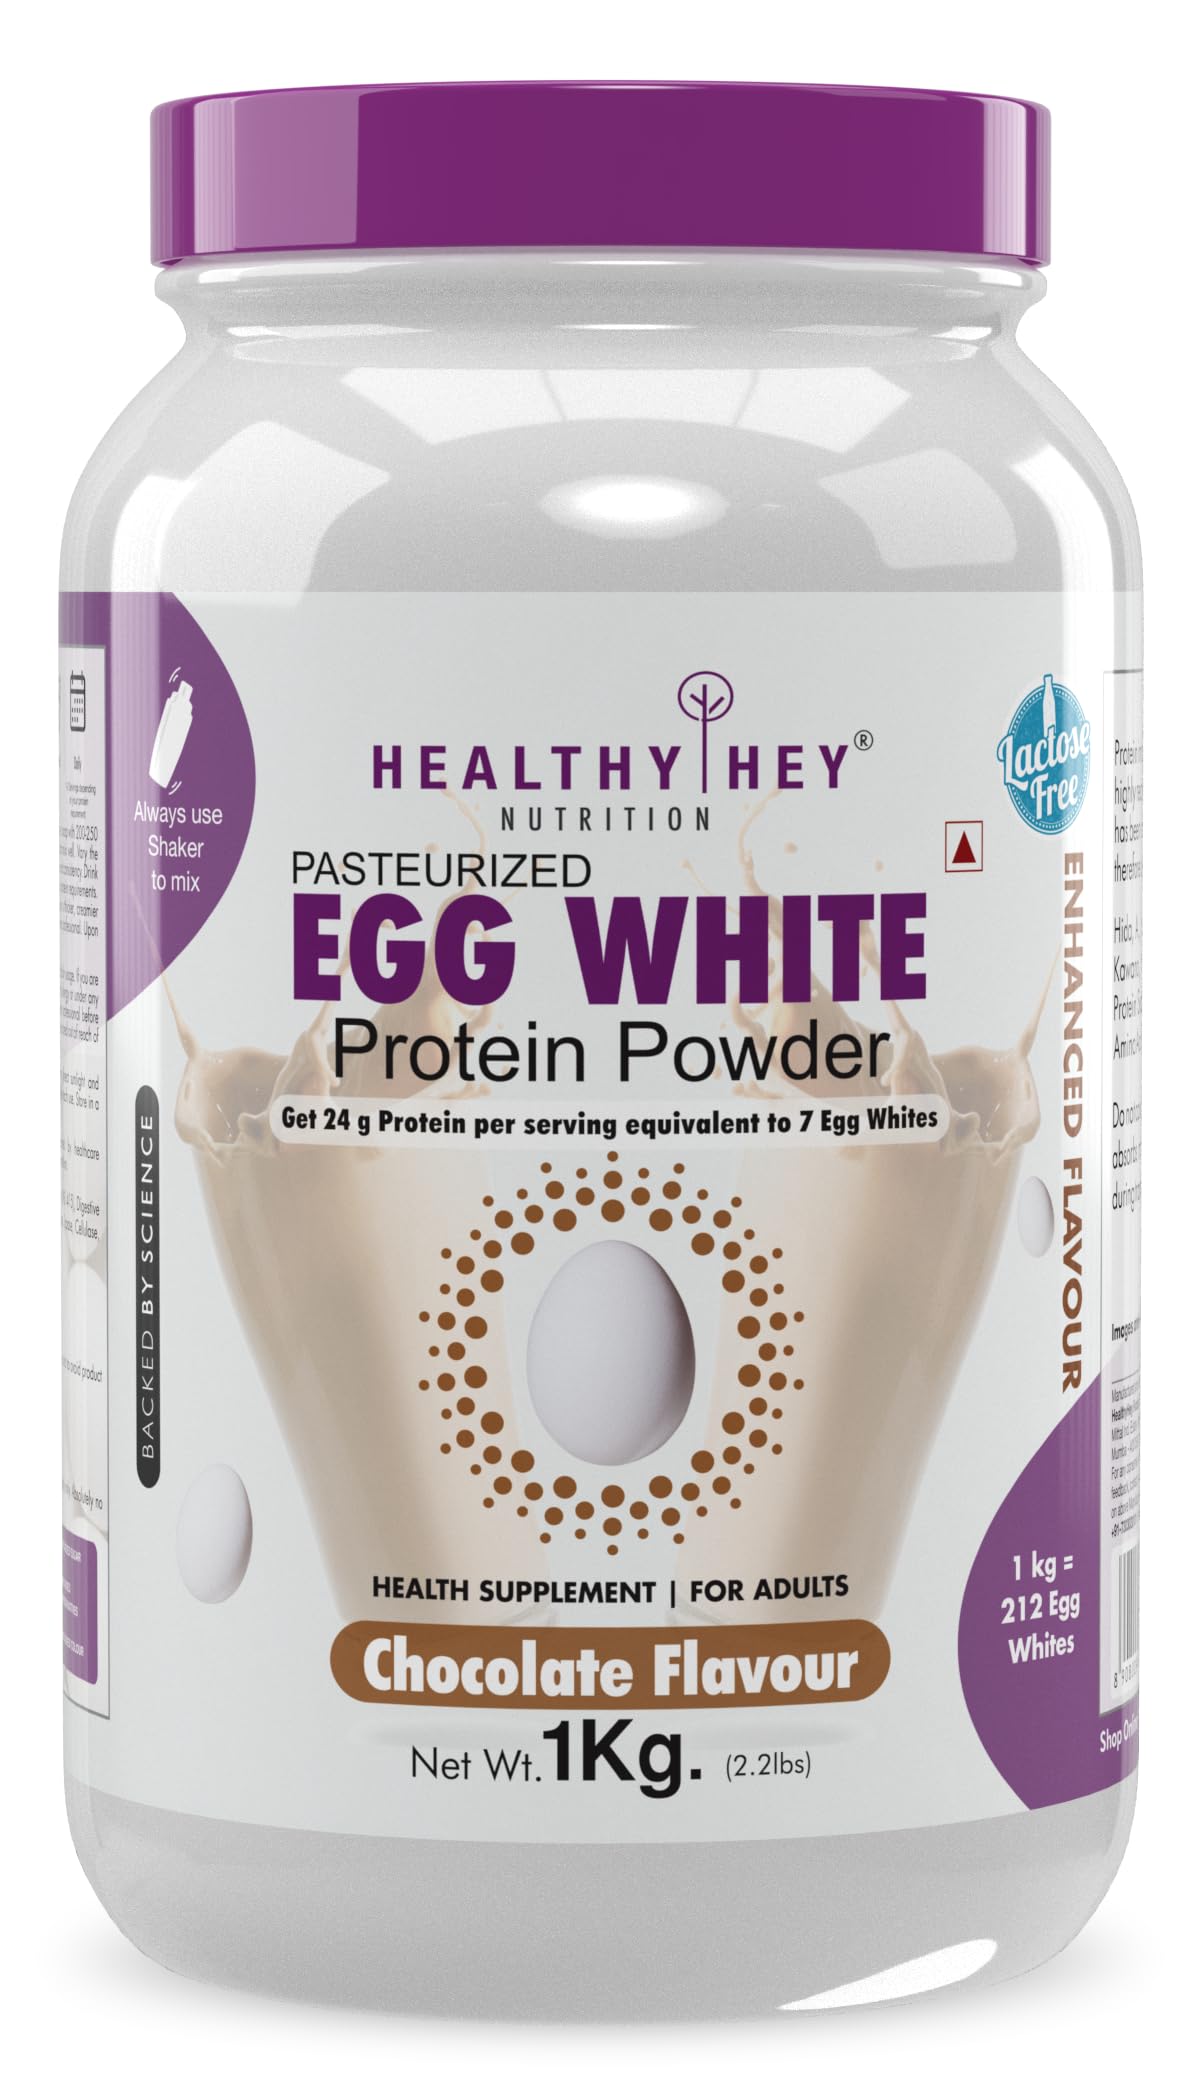 HealthyHey Nutrition 100% Egg White Protein - Instant Mix - 80% Protein - Non GMO & Lactose Free - 1Kg (Chocolate), 30 Servings